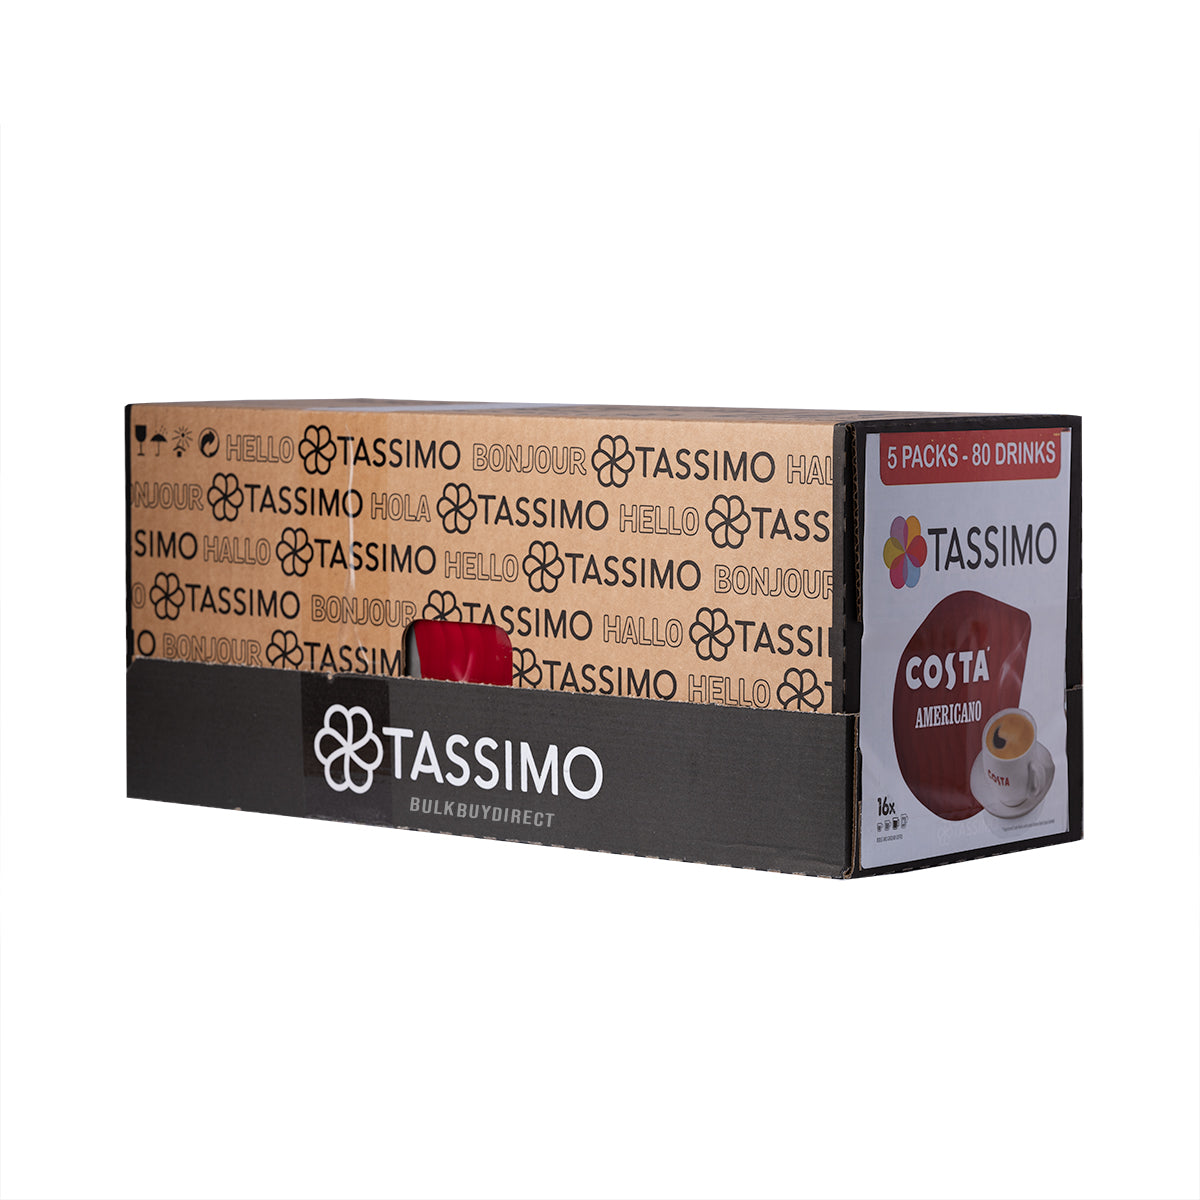 Costa Tassimo Americano Coffee Pods - 80 Servings: Elevate Your Coffee Experience with Costa's Classic Brew